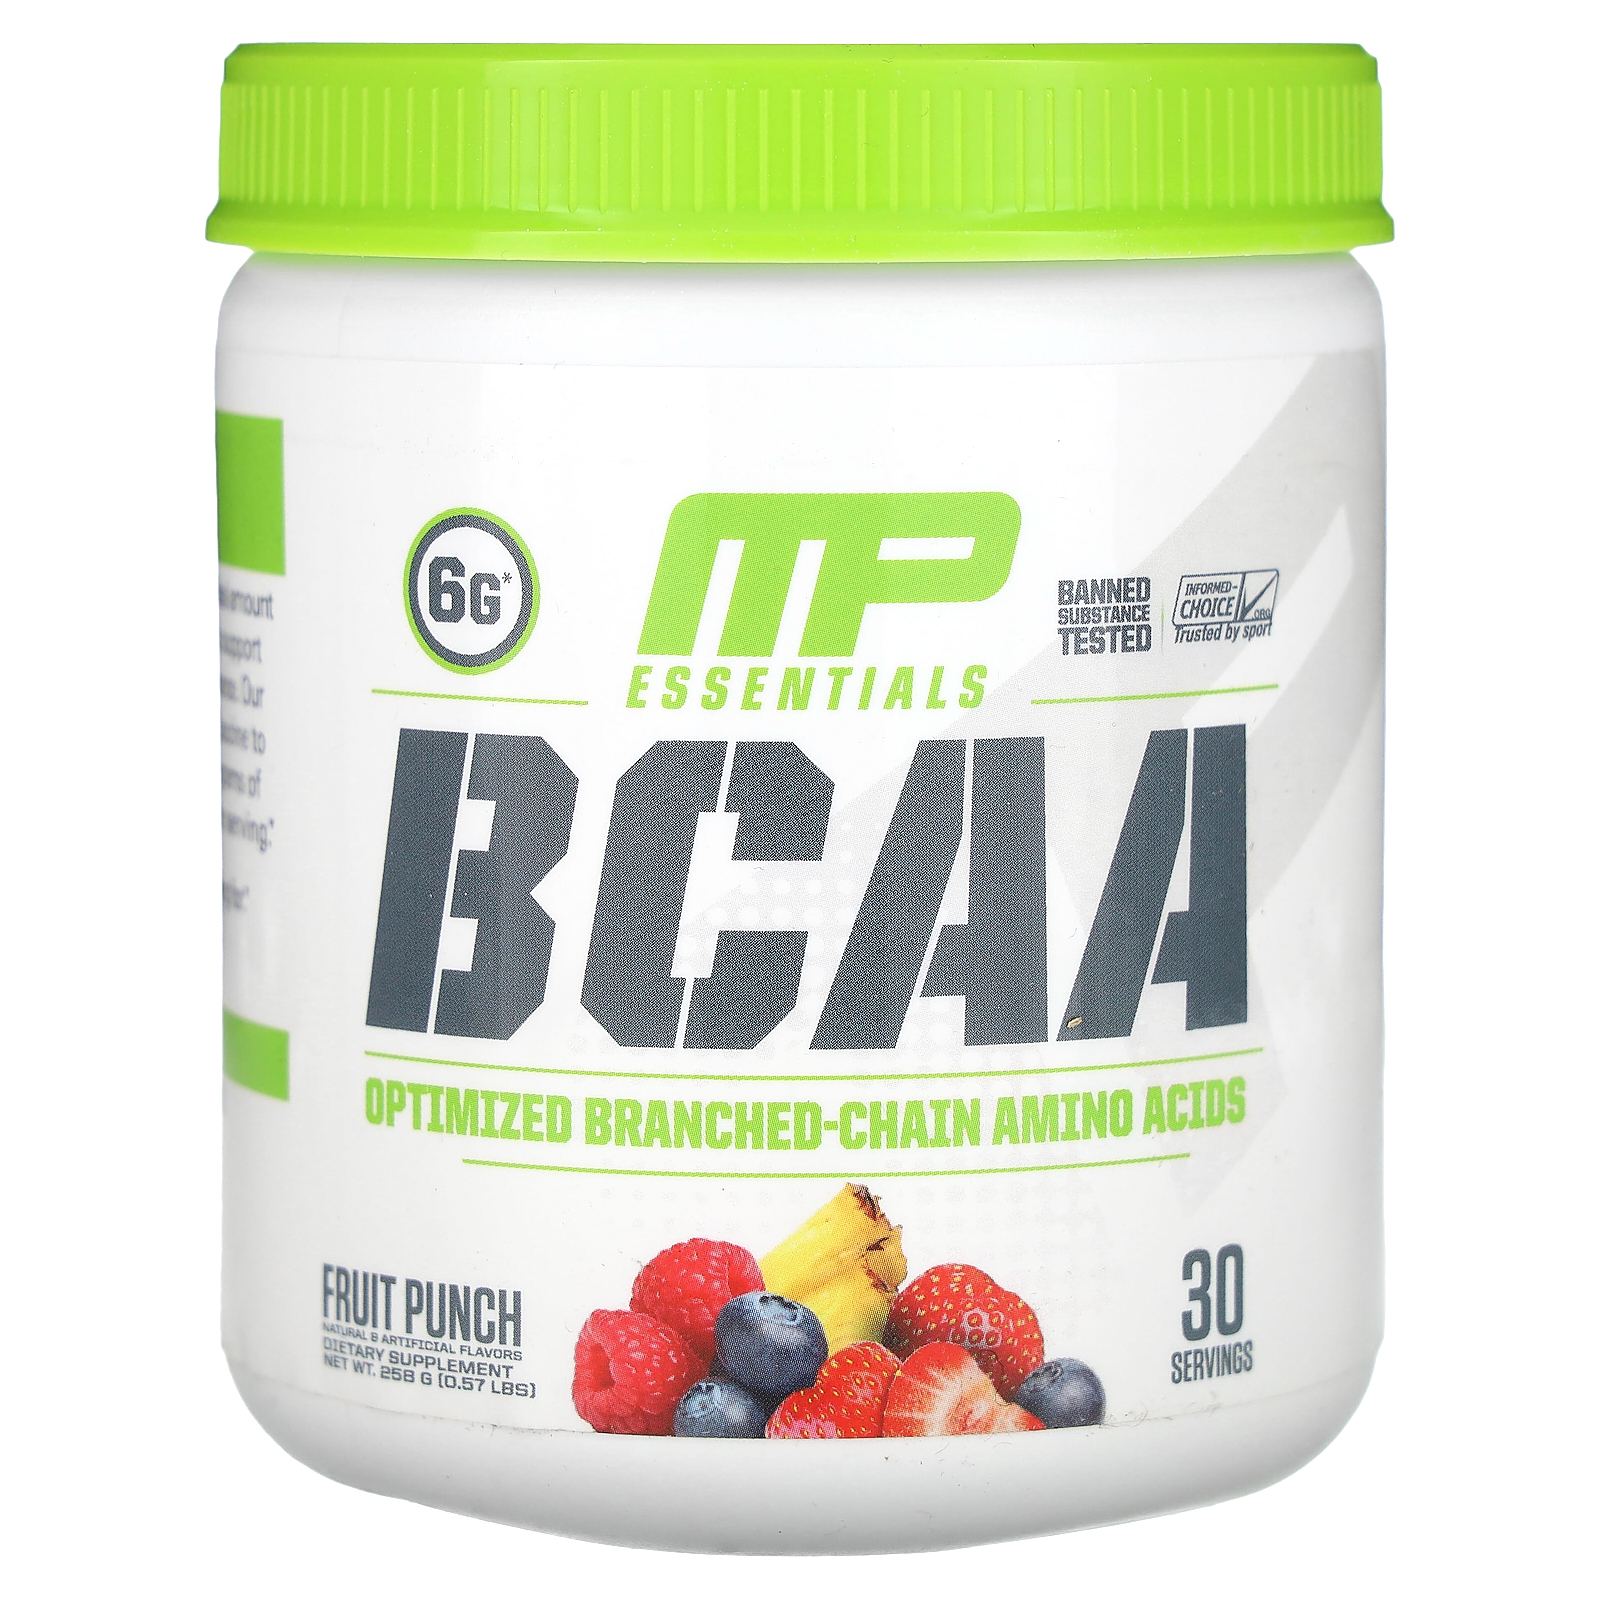 MusclePharm BCAA Essentials Powder, Post Workout Recovery, 30 Servings, Fruit Punch - image 1 of 2